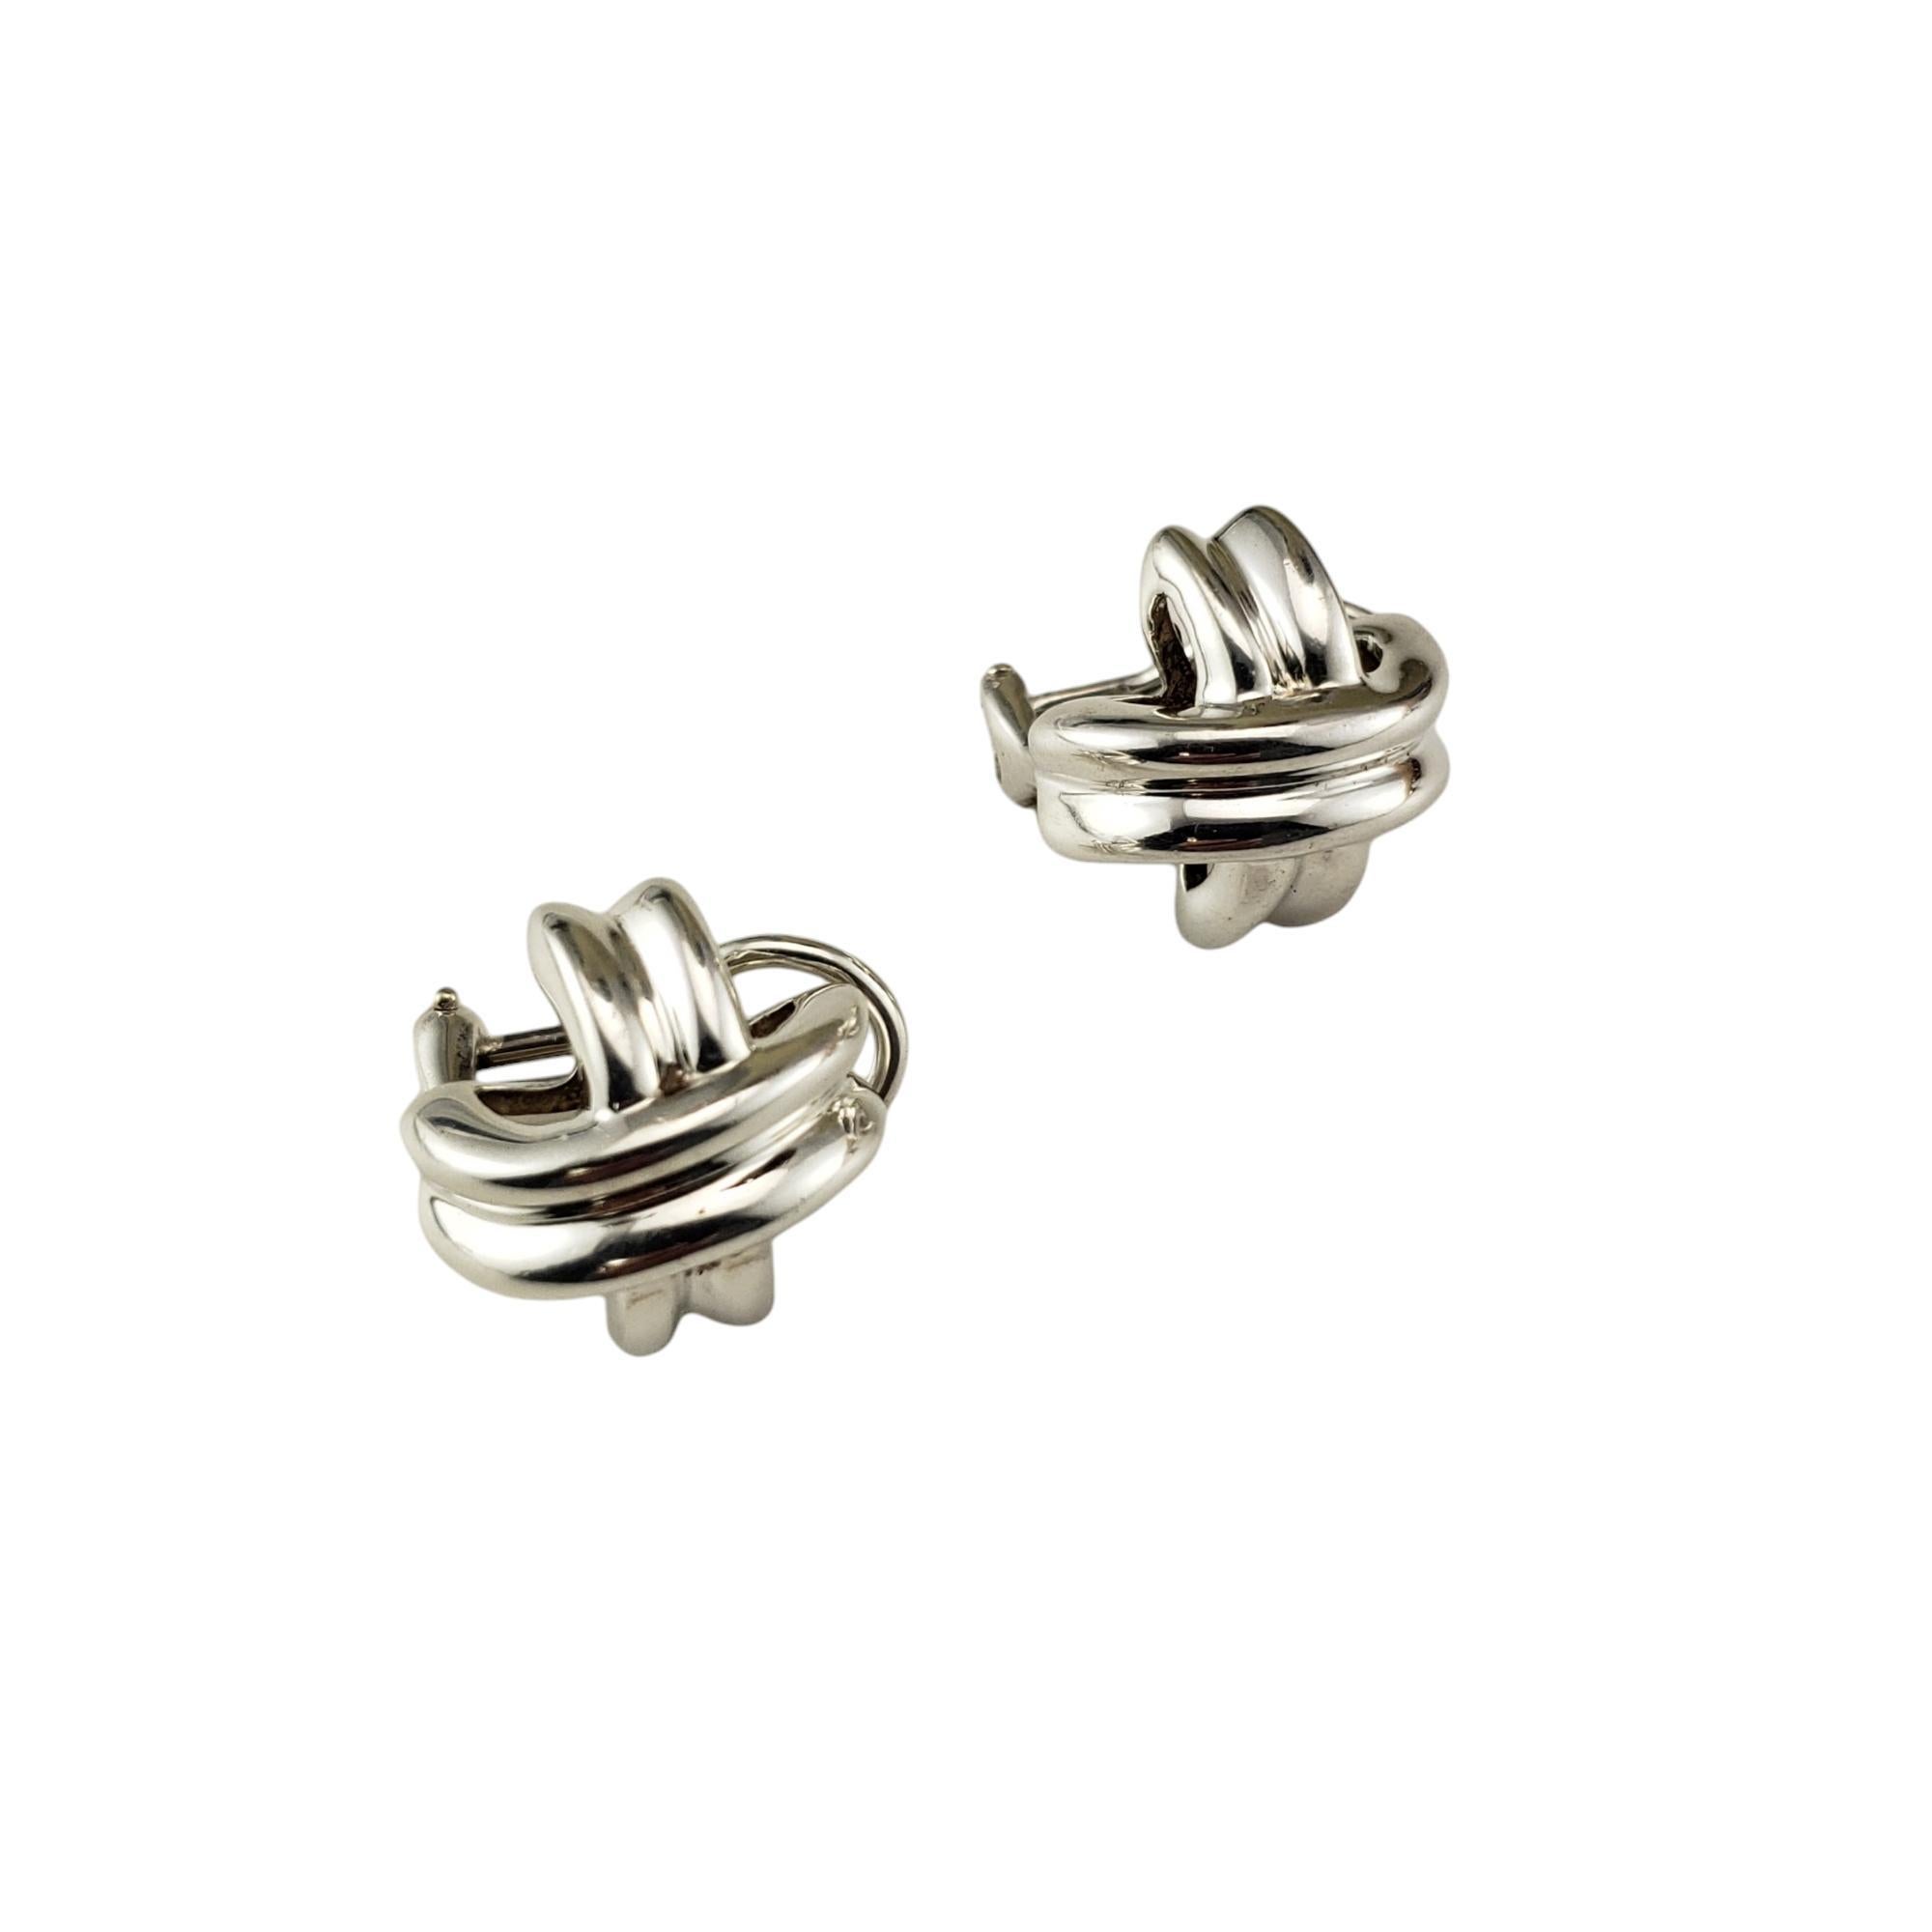 Vintage Tiffany & Co. Sterling Silver X Earrings

These elegant X earrings by Tiffany & Co. are crafted in beautifully detailed sterling silver.  

Omega back closures.

Size: 15 mm x 15 mm

Hallmark:  1990  T&CO  925

Weight: 5.5 dwt./ 8.6